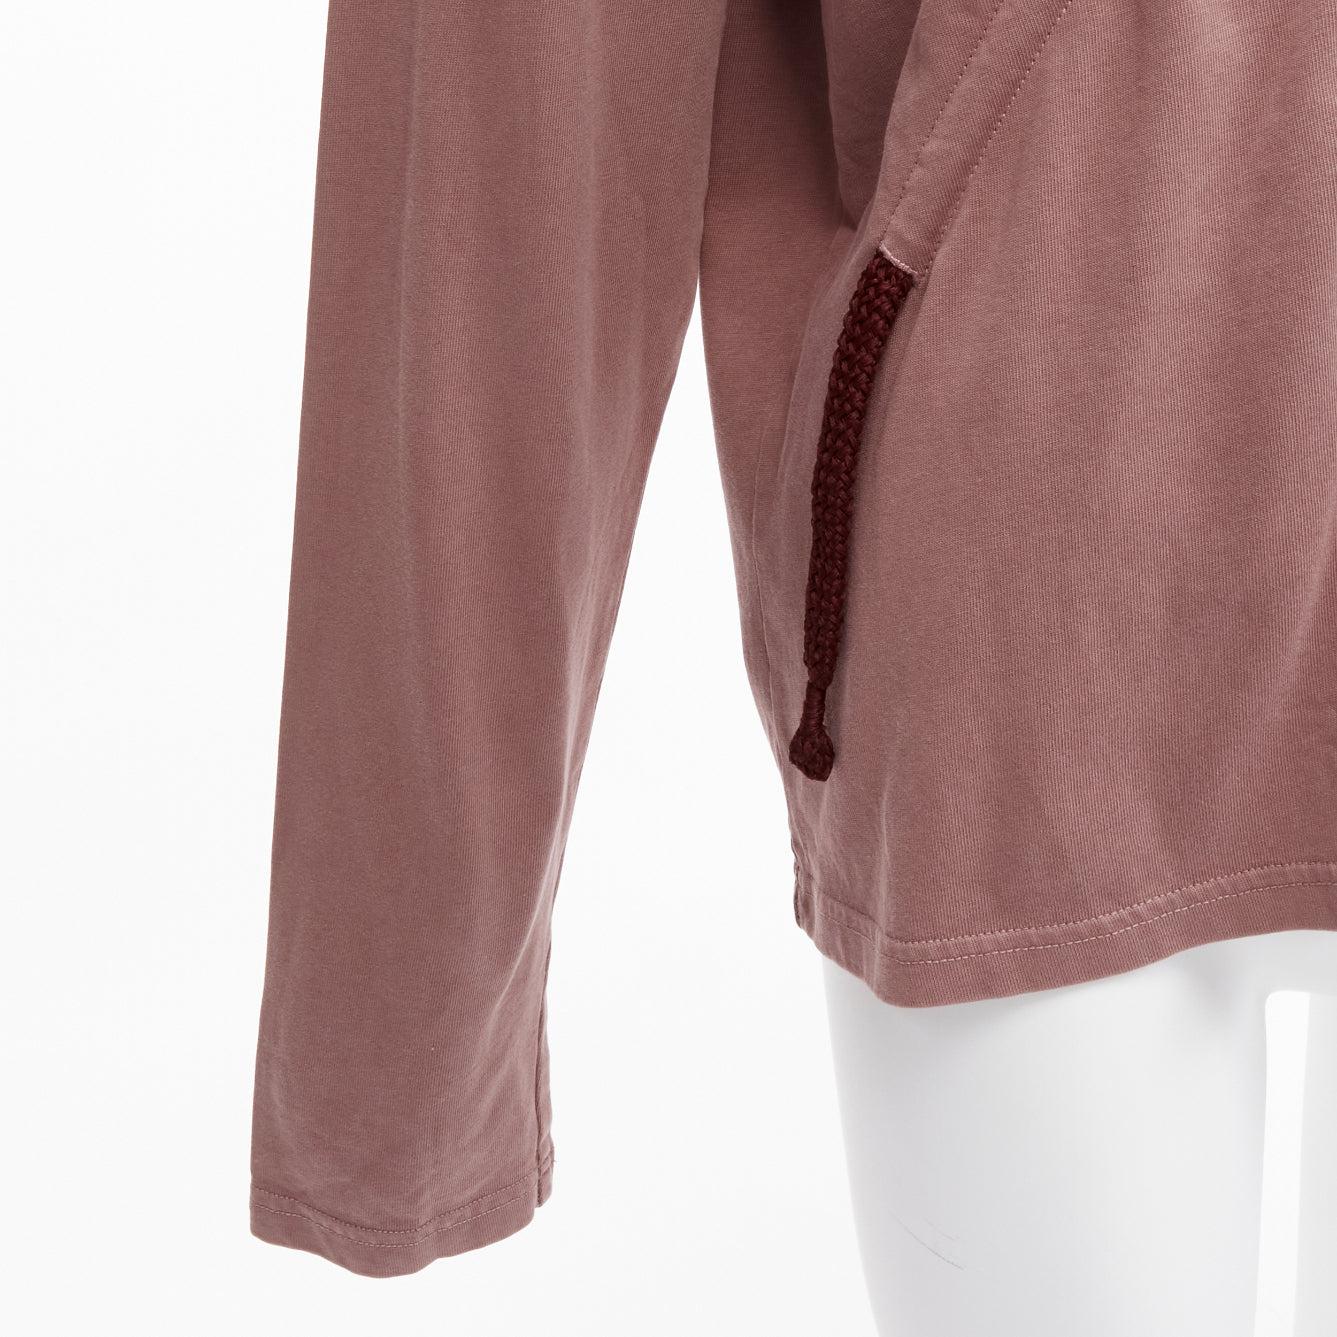 CRAIG GREEN burgundy drawstring rope detail long sleeve tshirt S
Reference: BSHW/A00033
Brand: Craig Green
Material: Cotton
Color: Burgundy
Pattern: Solid
Closure: Pullover
Extra Details: Drawstring can be ruched to create various effect.
Made in: